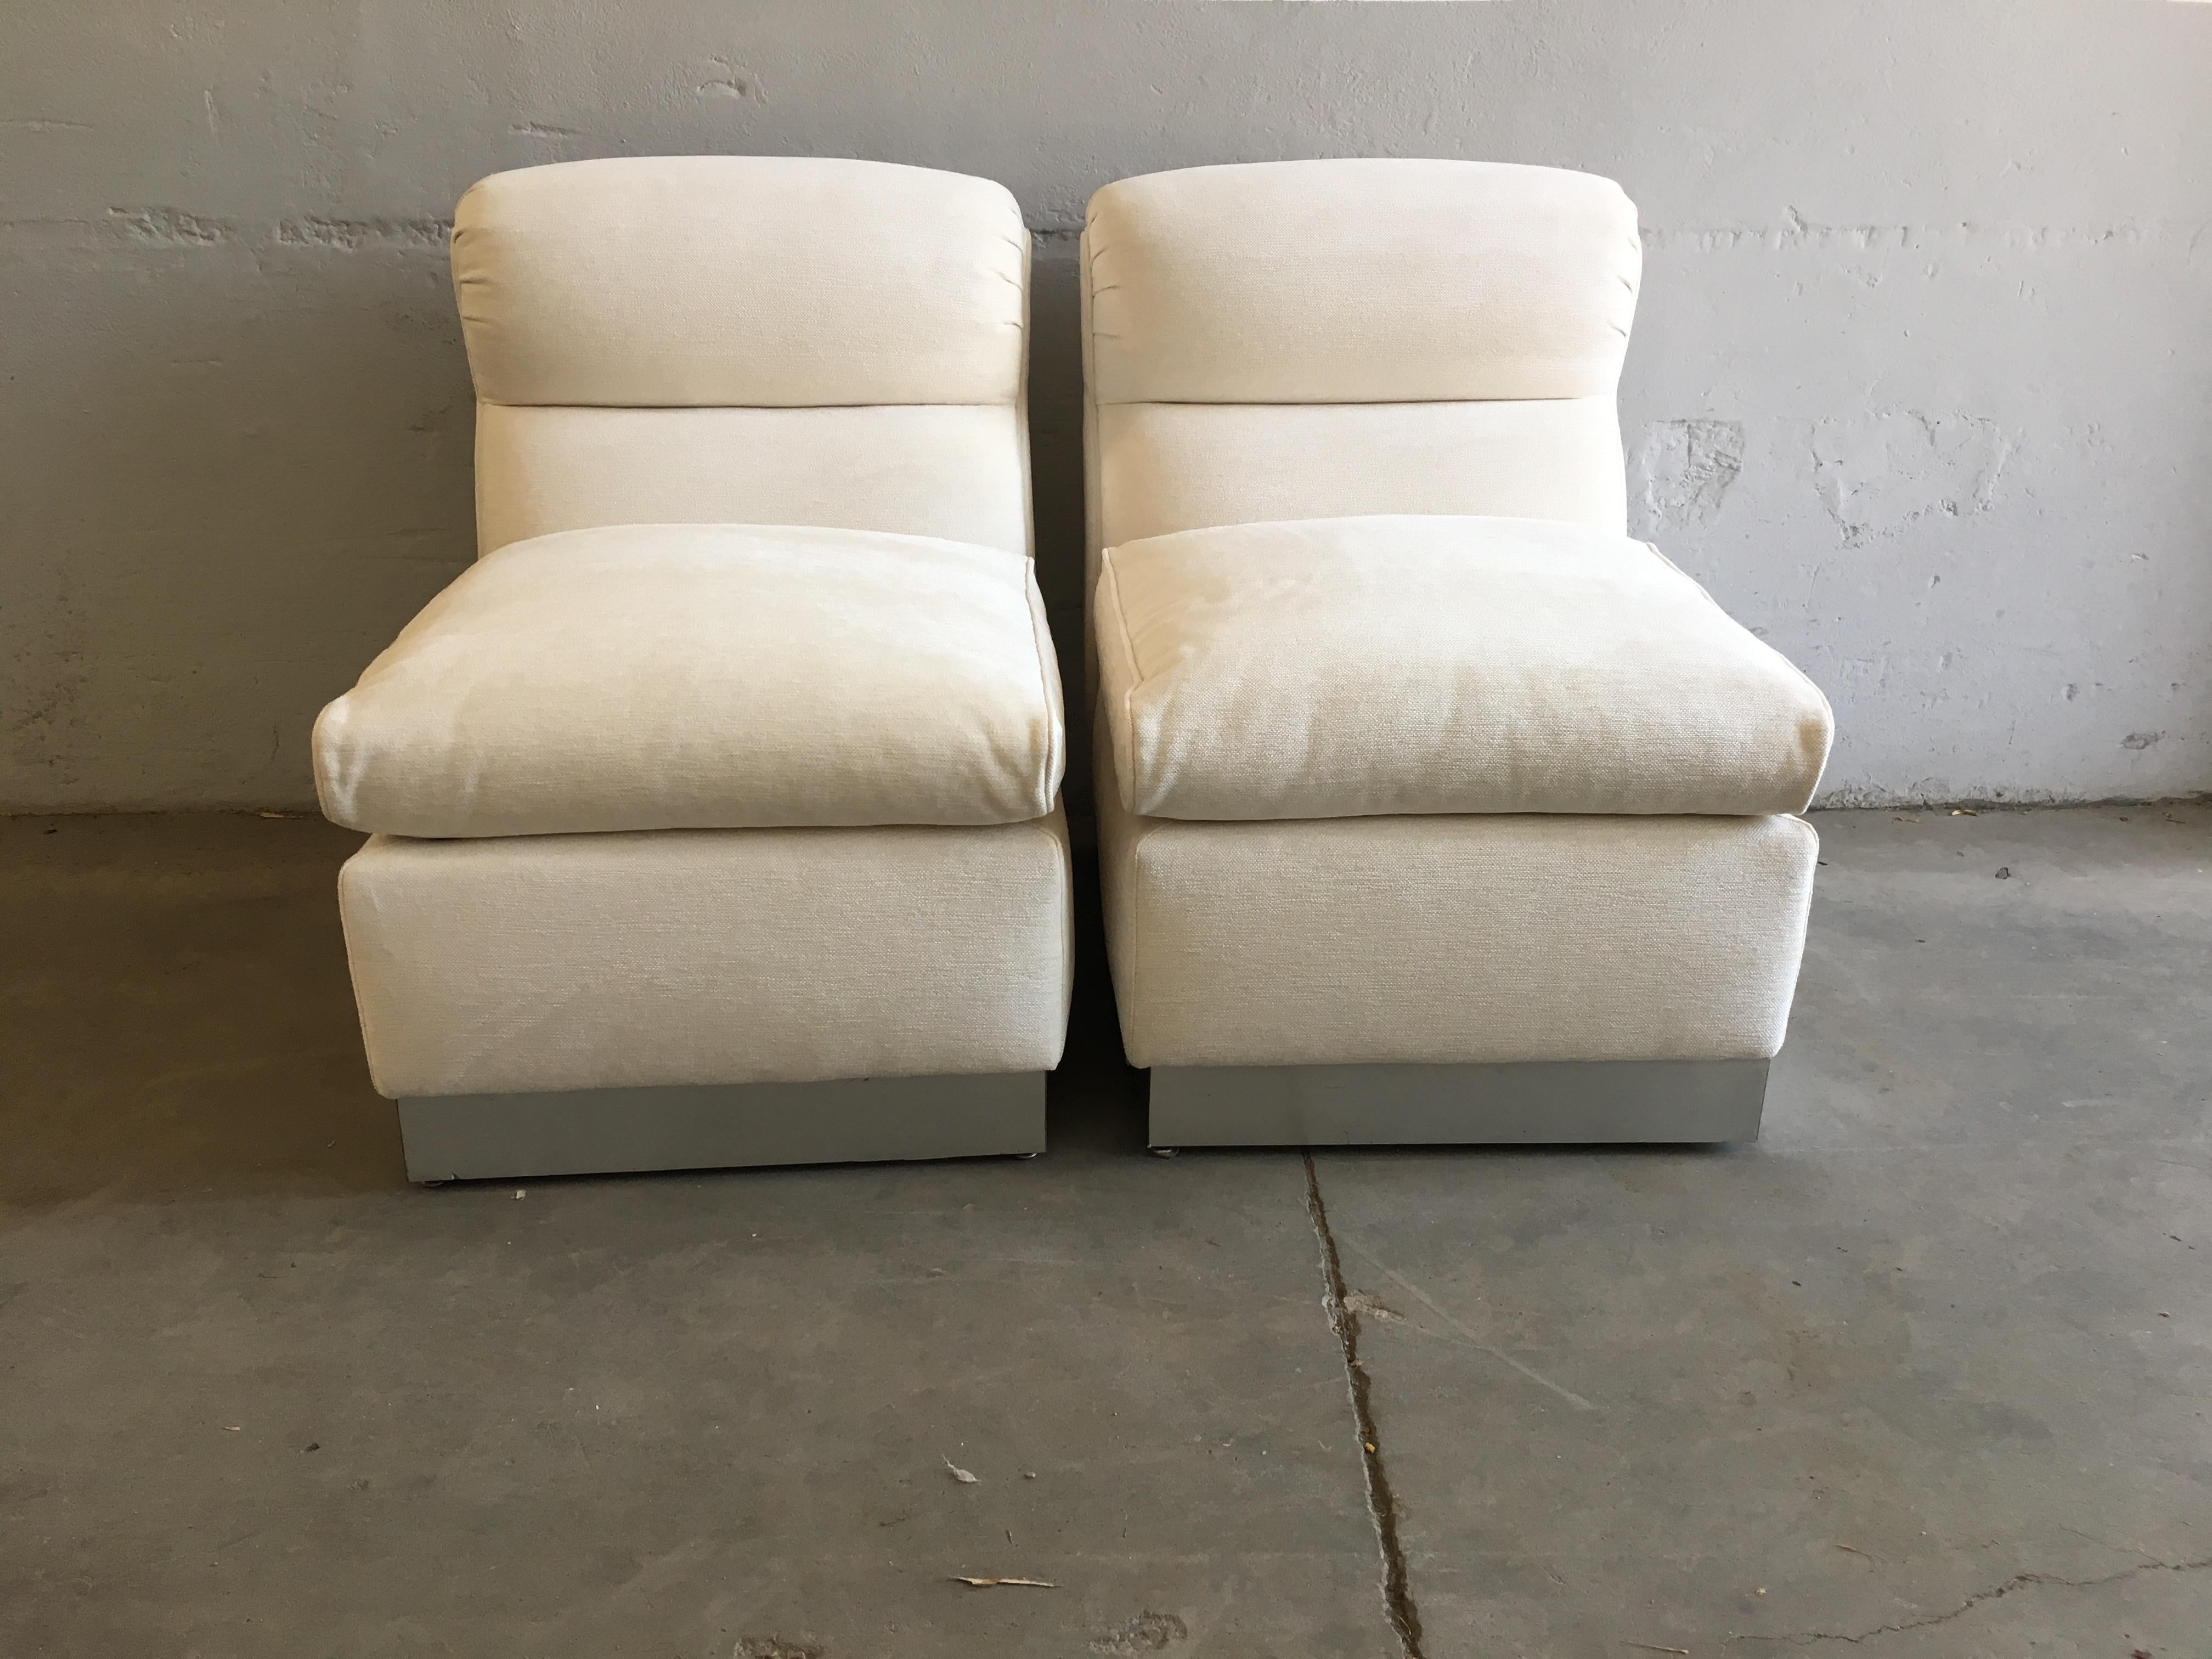 Mid-Century Modern Italian pair of upholstered armchairs with chrome basement.
These armchairs have been completely restored and reupholstered with vintage Fabric from Rubelli (leader in Italy in top quality fabrics).